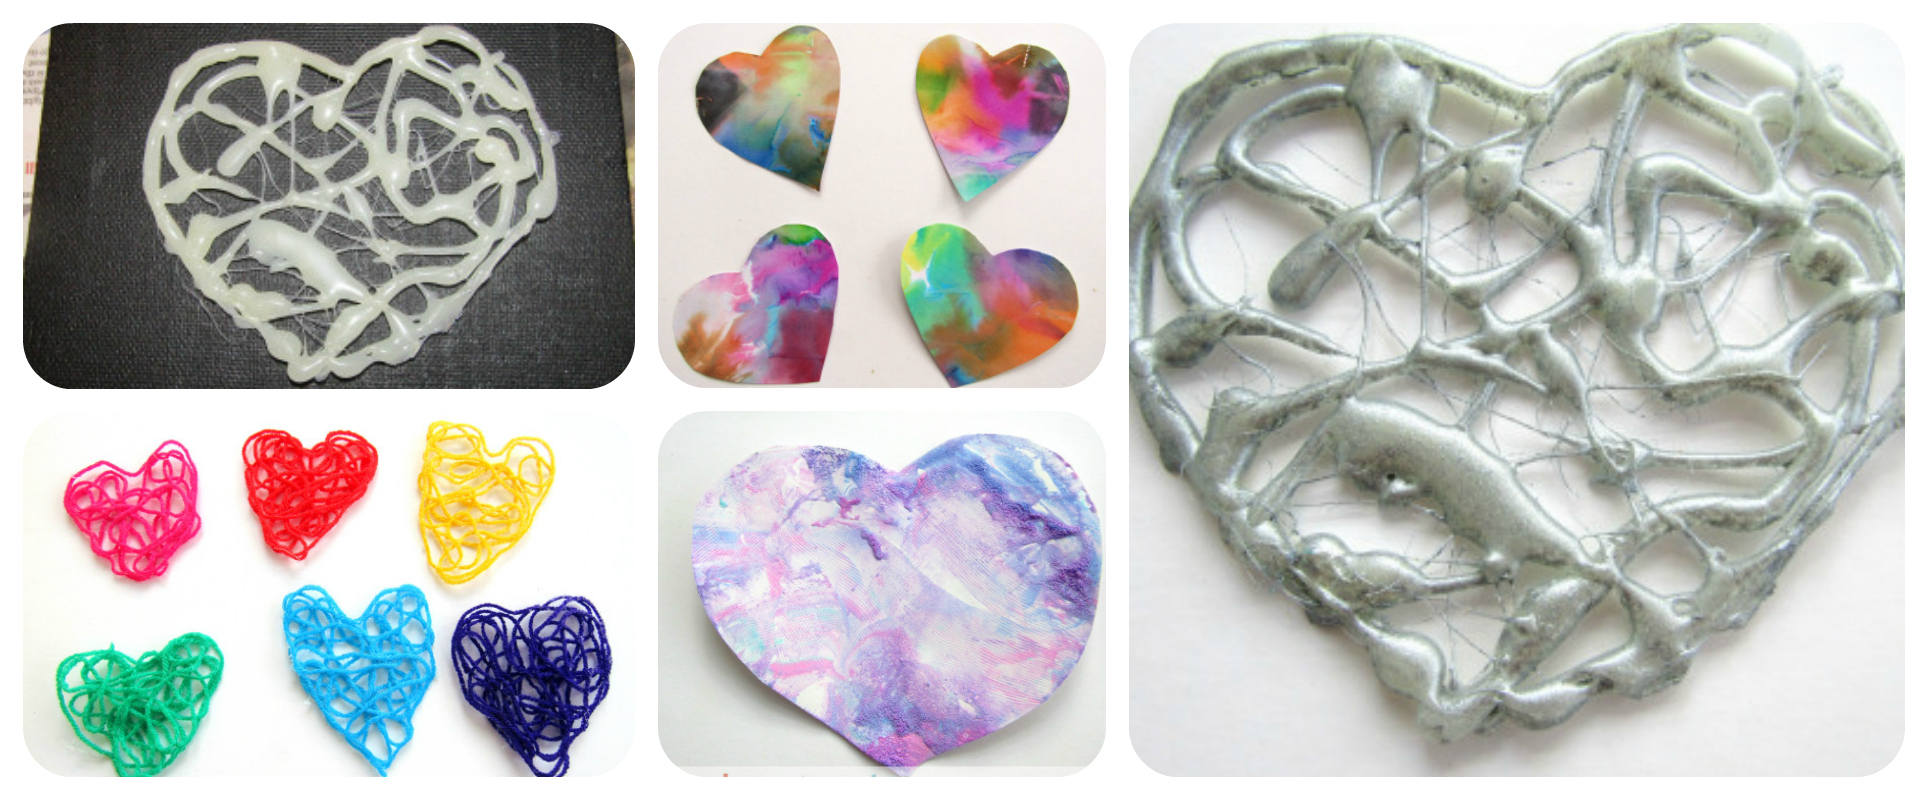 New Heart-Themed Crafts for Valentine's Day